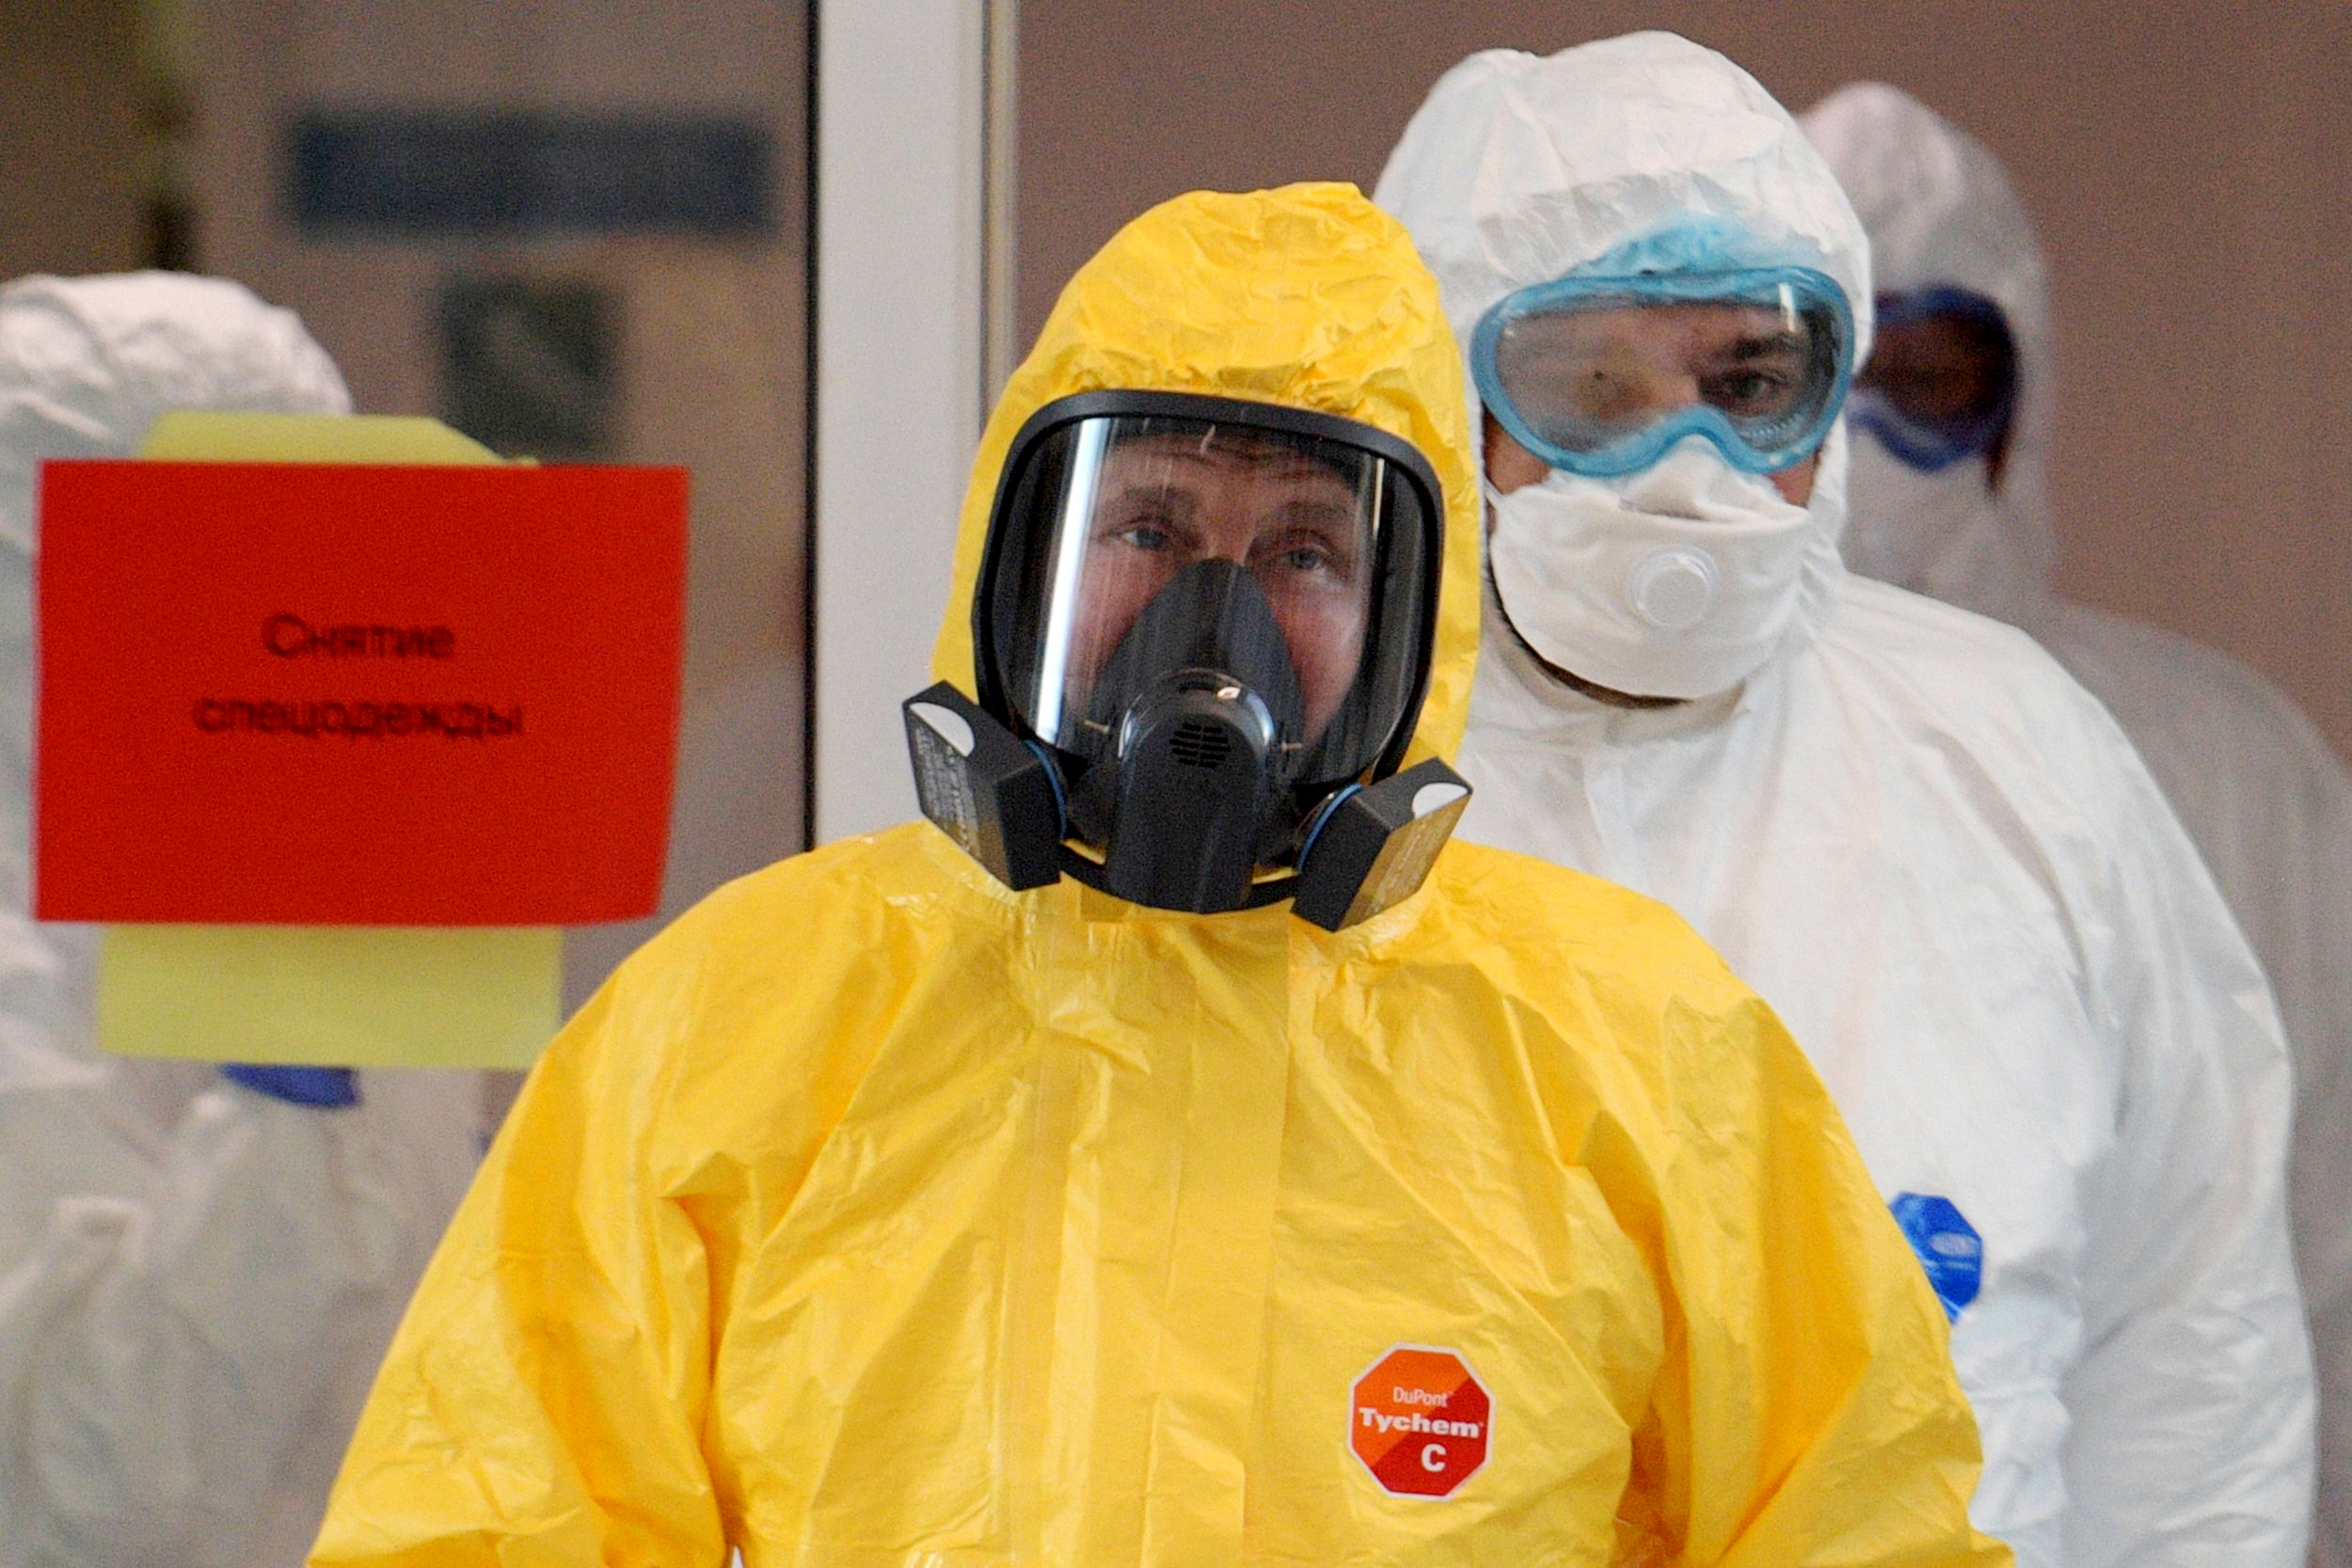 Putin dons hazmat suit, as Russia admits virus numbers likely far